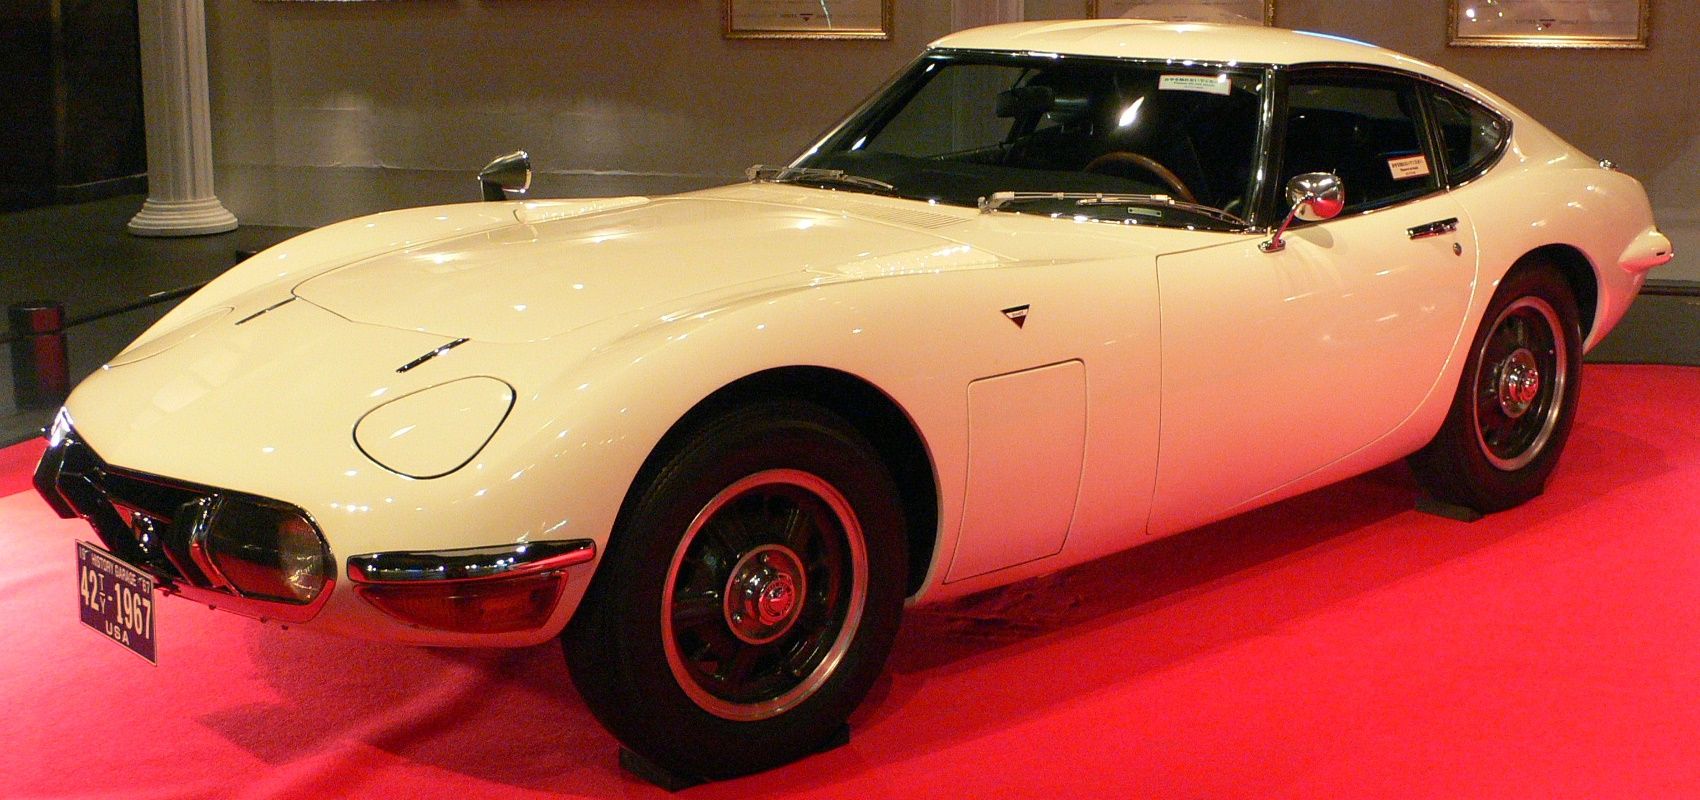 2000GT classic on red carpet